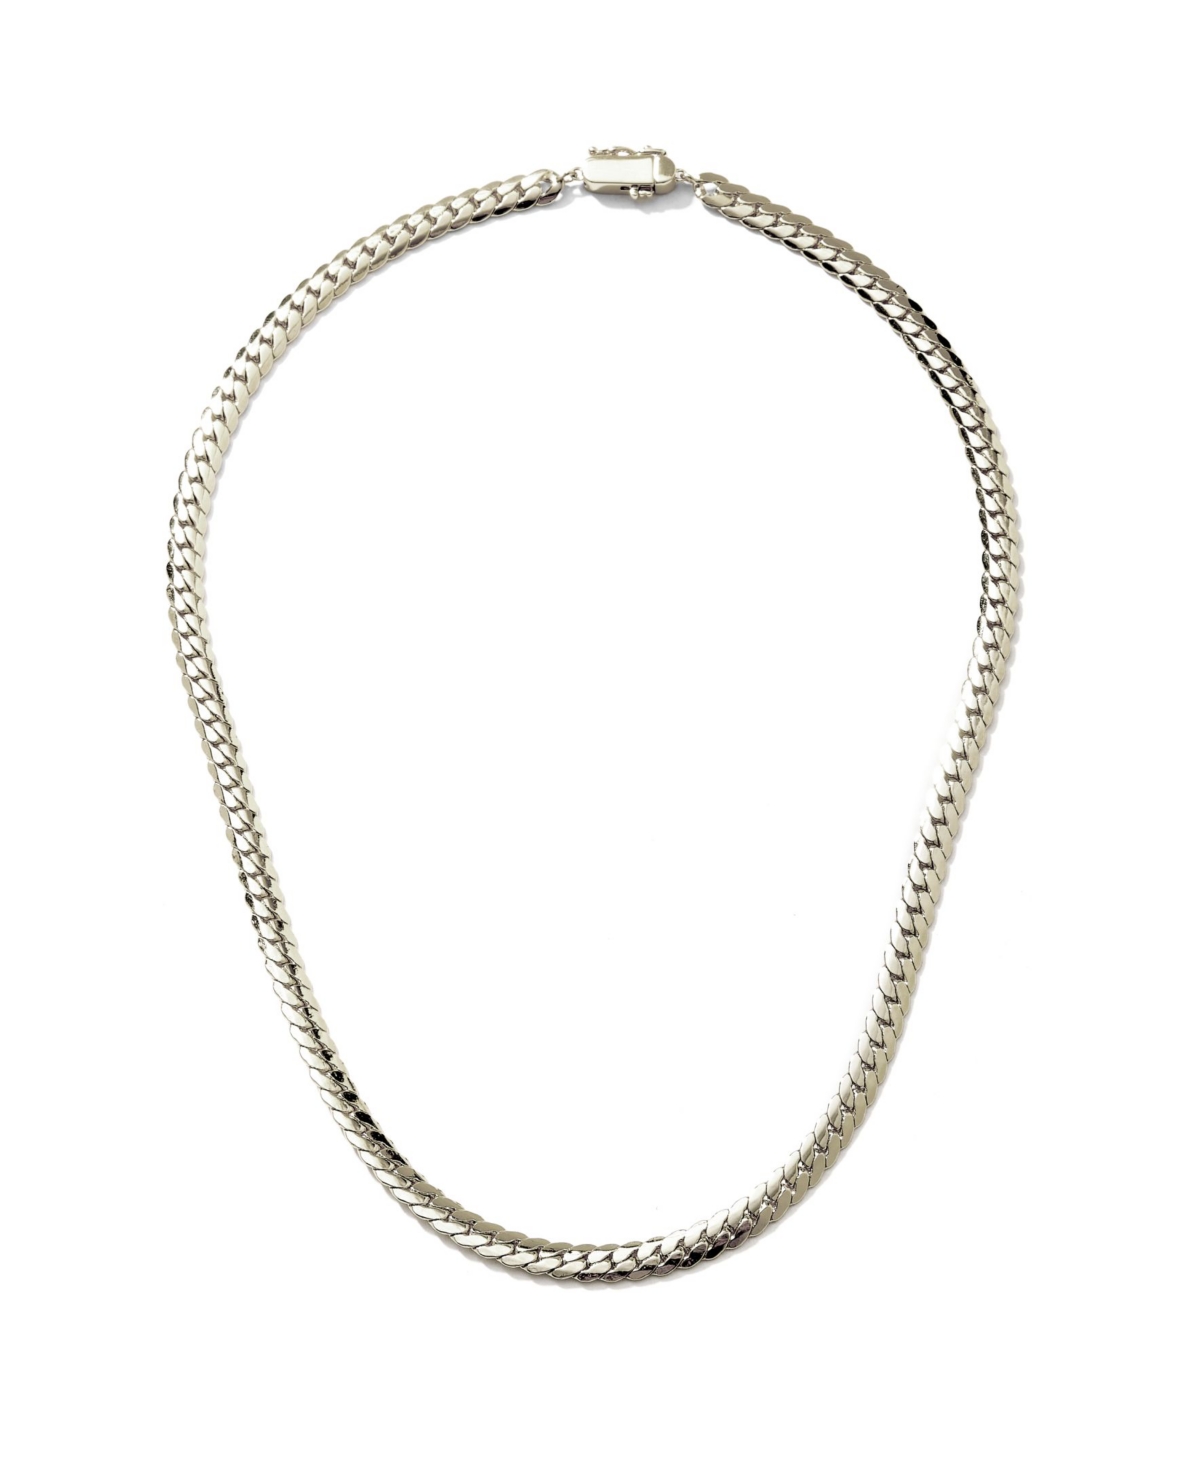 Plain Curb Link Necklace, Created for Macy's - Silver-Tone